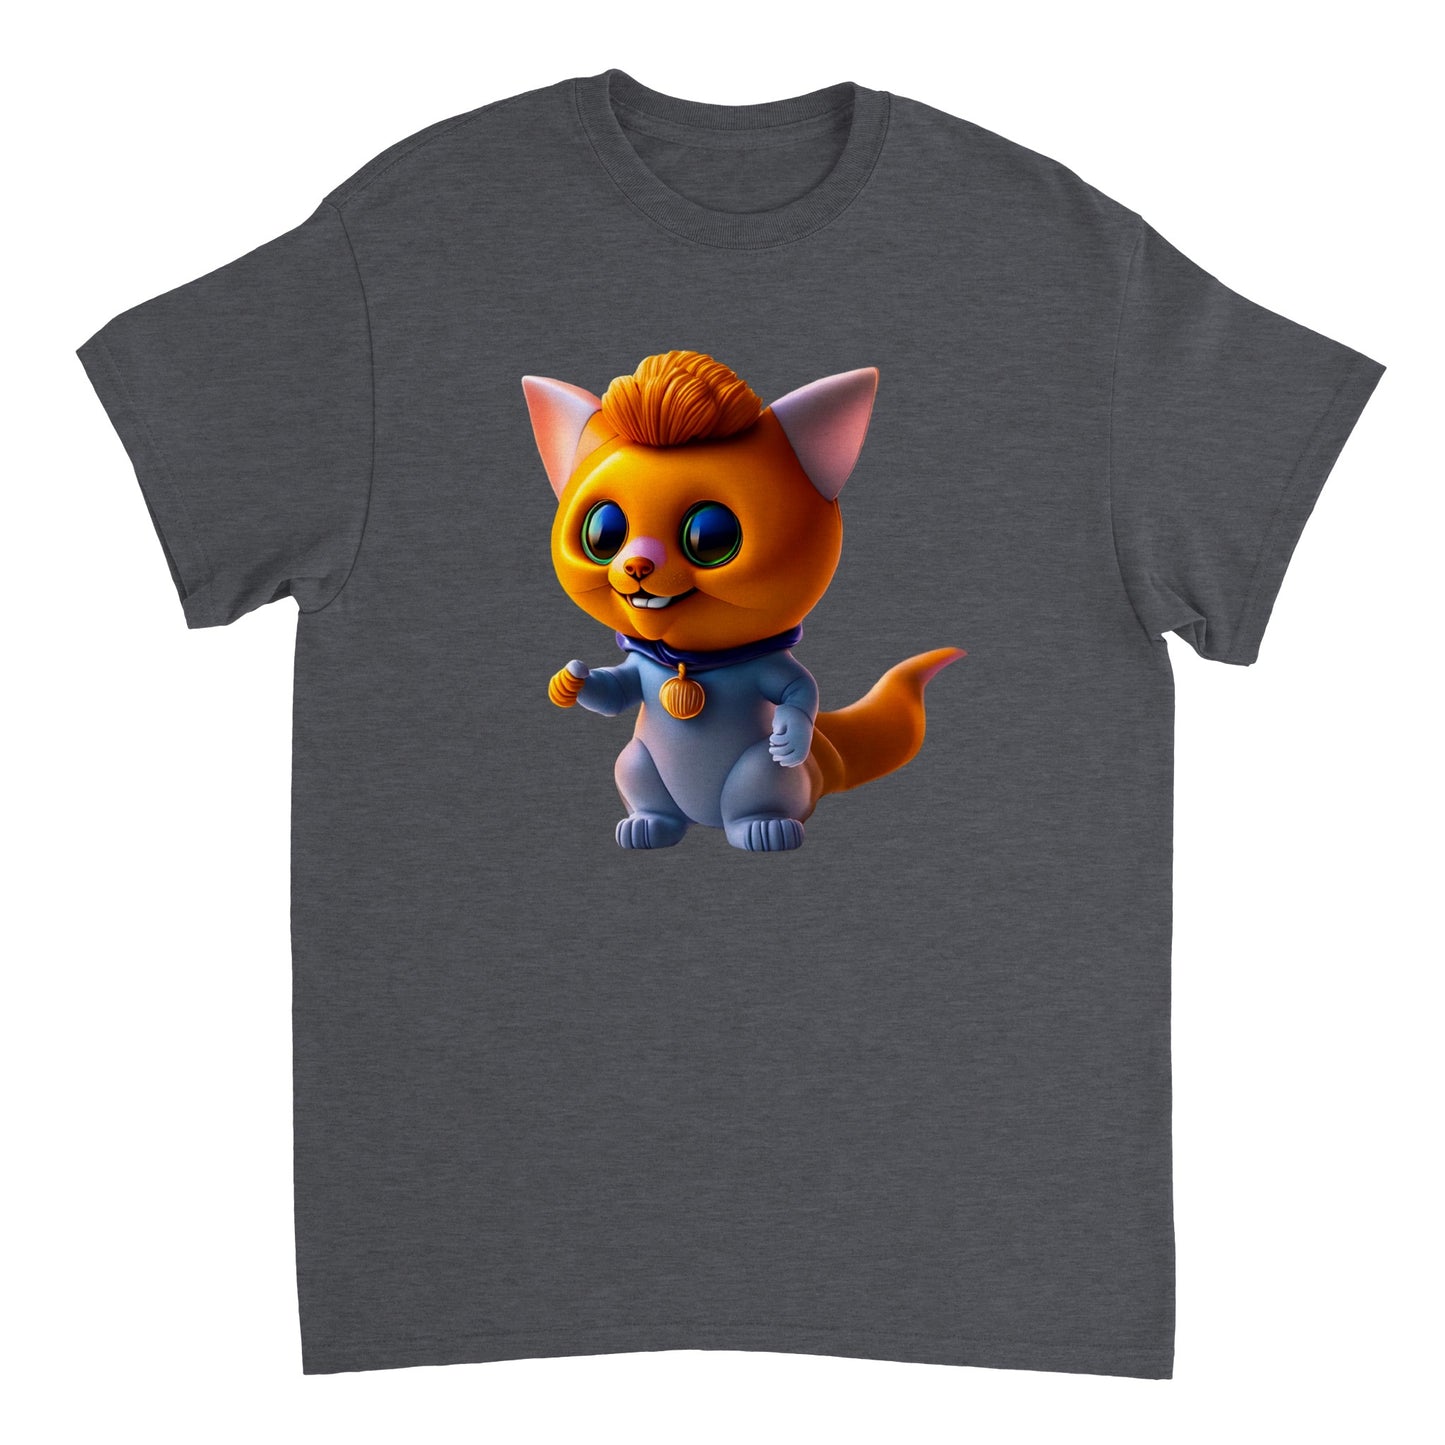 Adorable, Cool, Cute Cats and Kittens Toy - Heavyweight Unisex Crewneck T-shirt 61